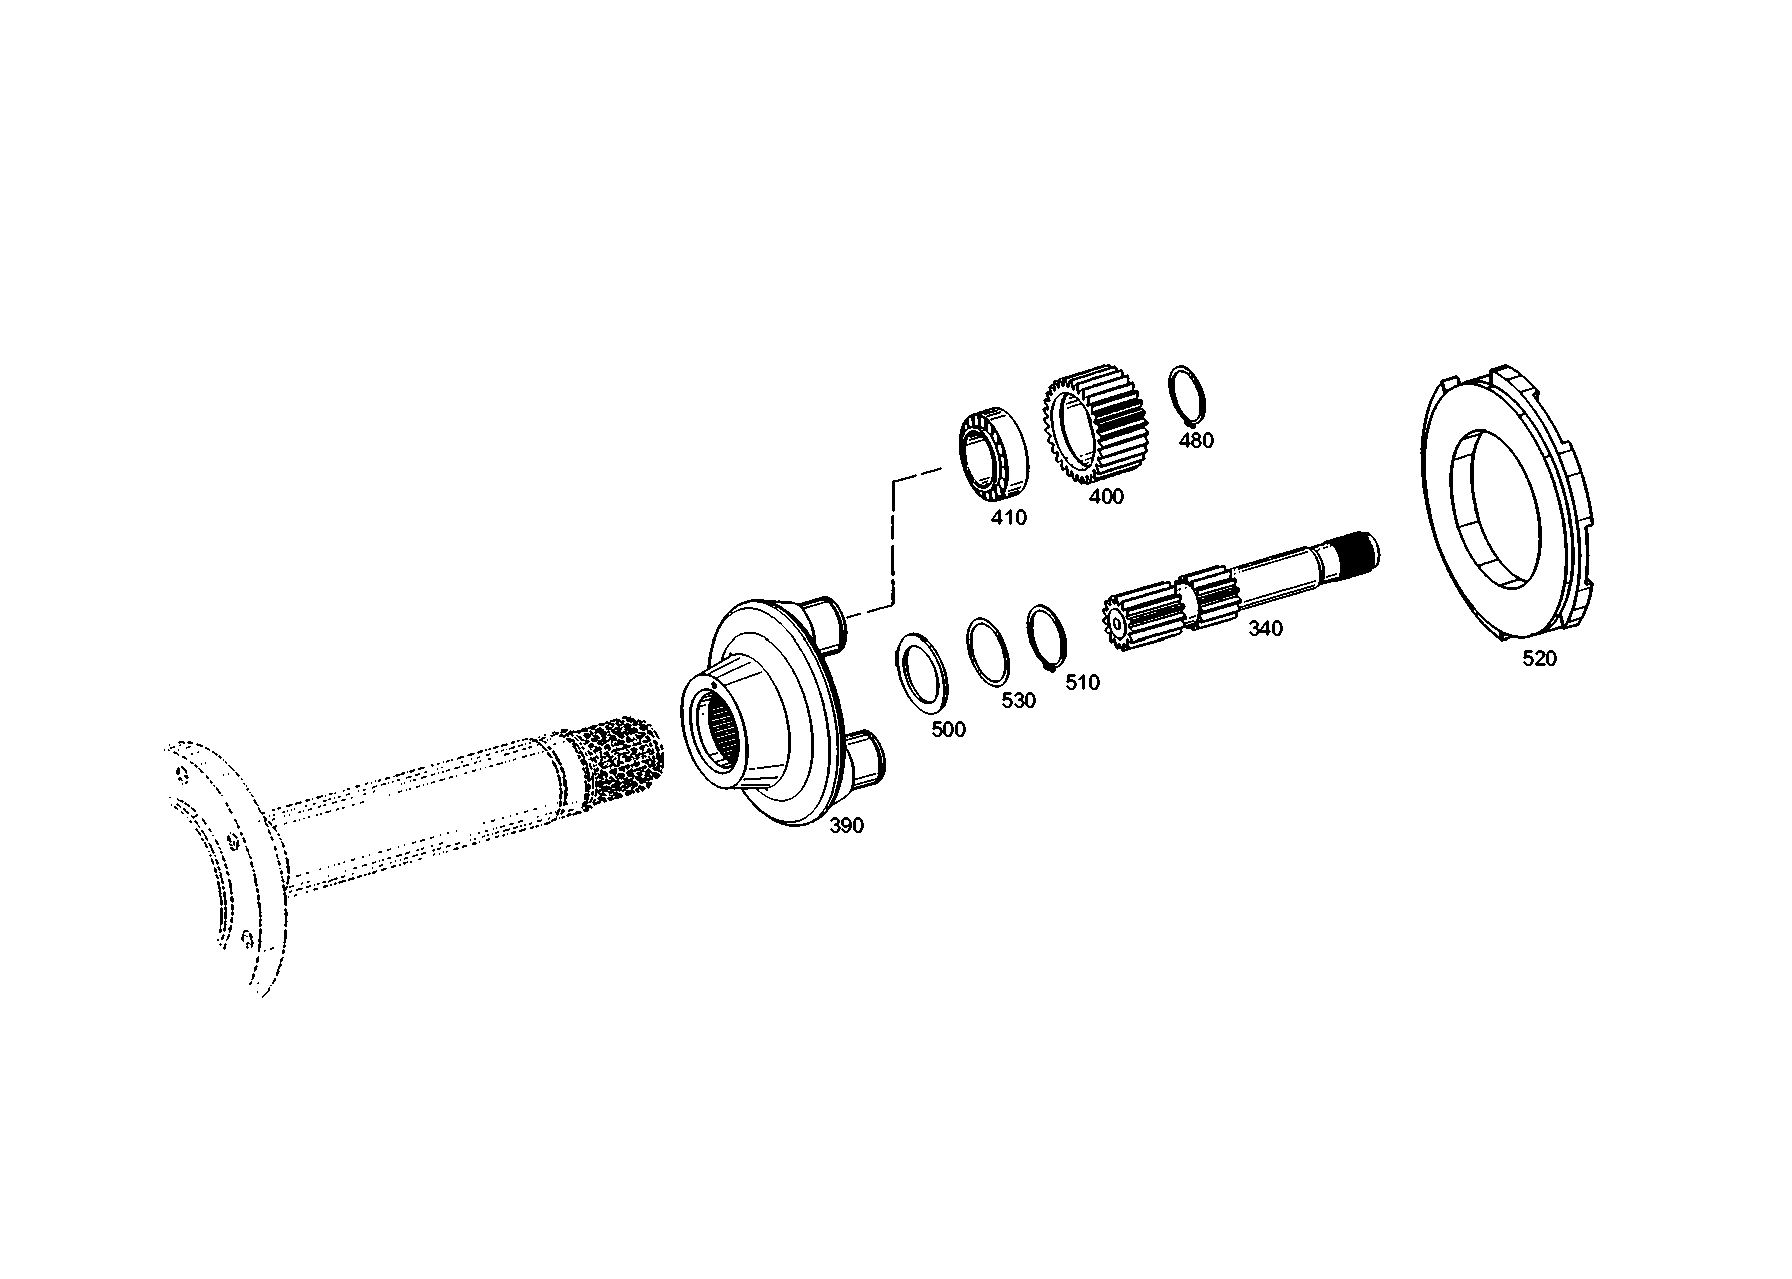 drawing for HAMM AG 1282425 - WASHER (figure 4)